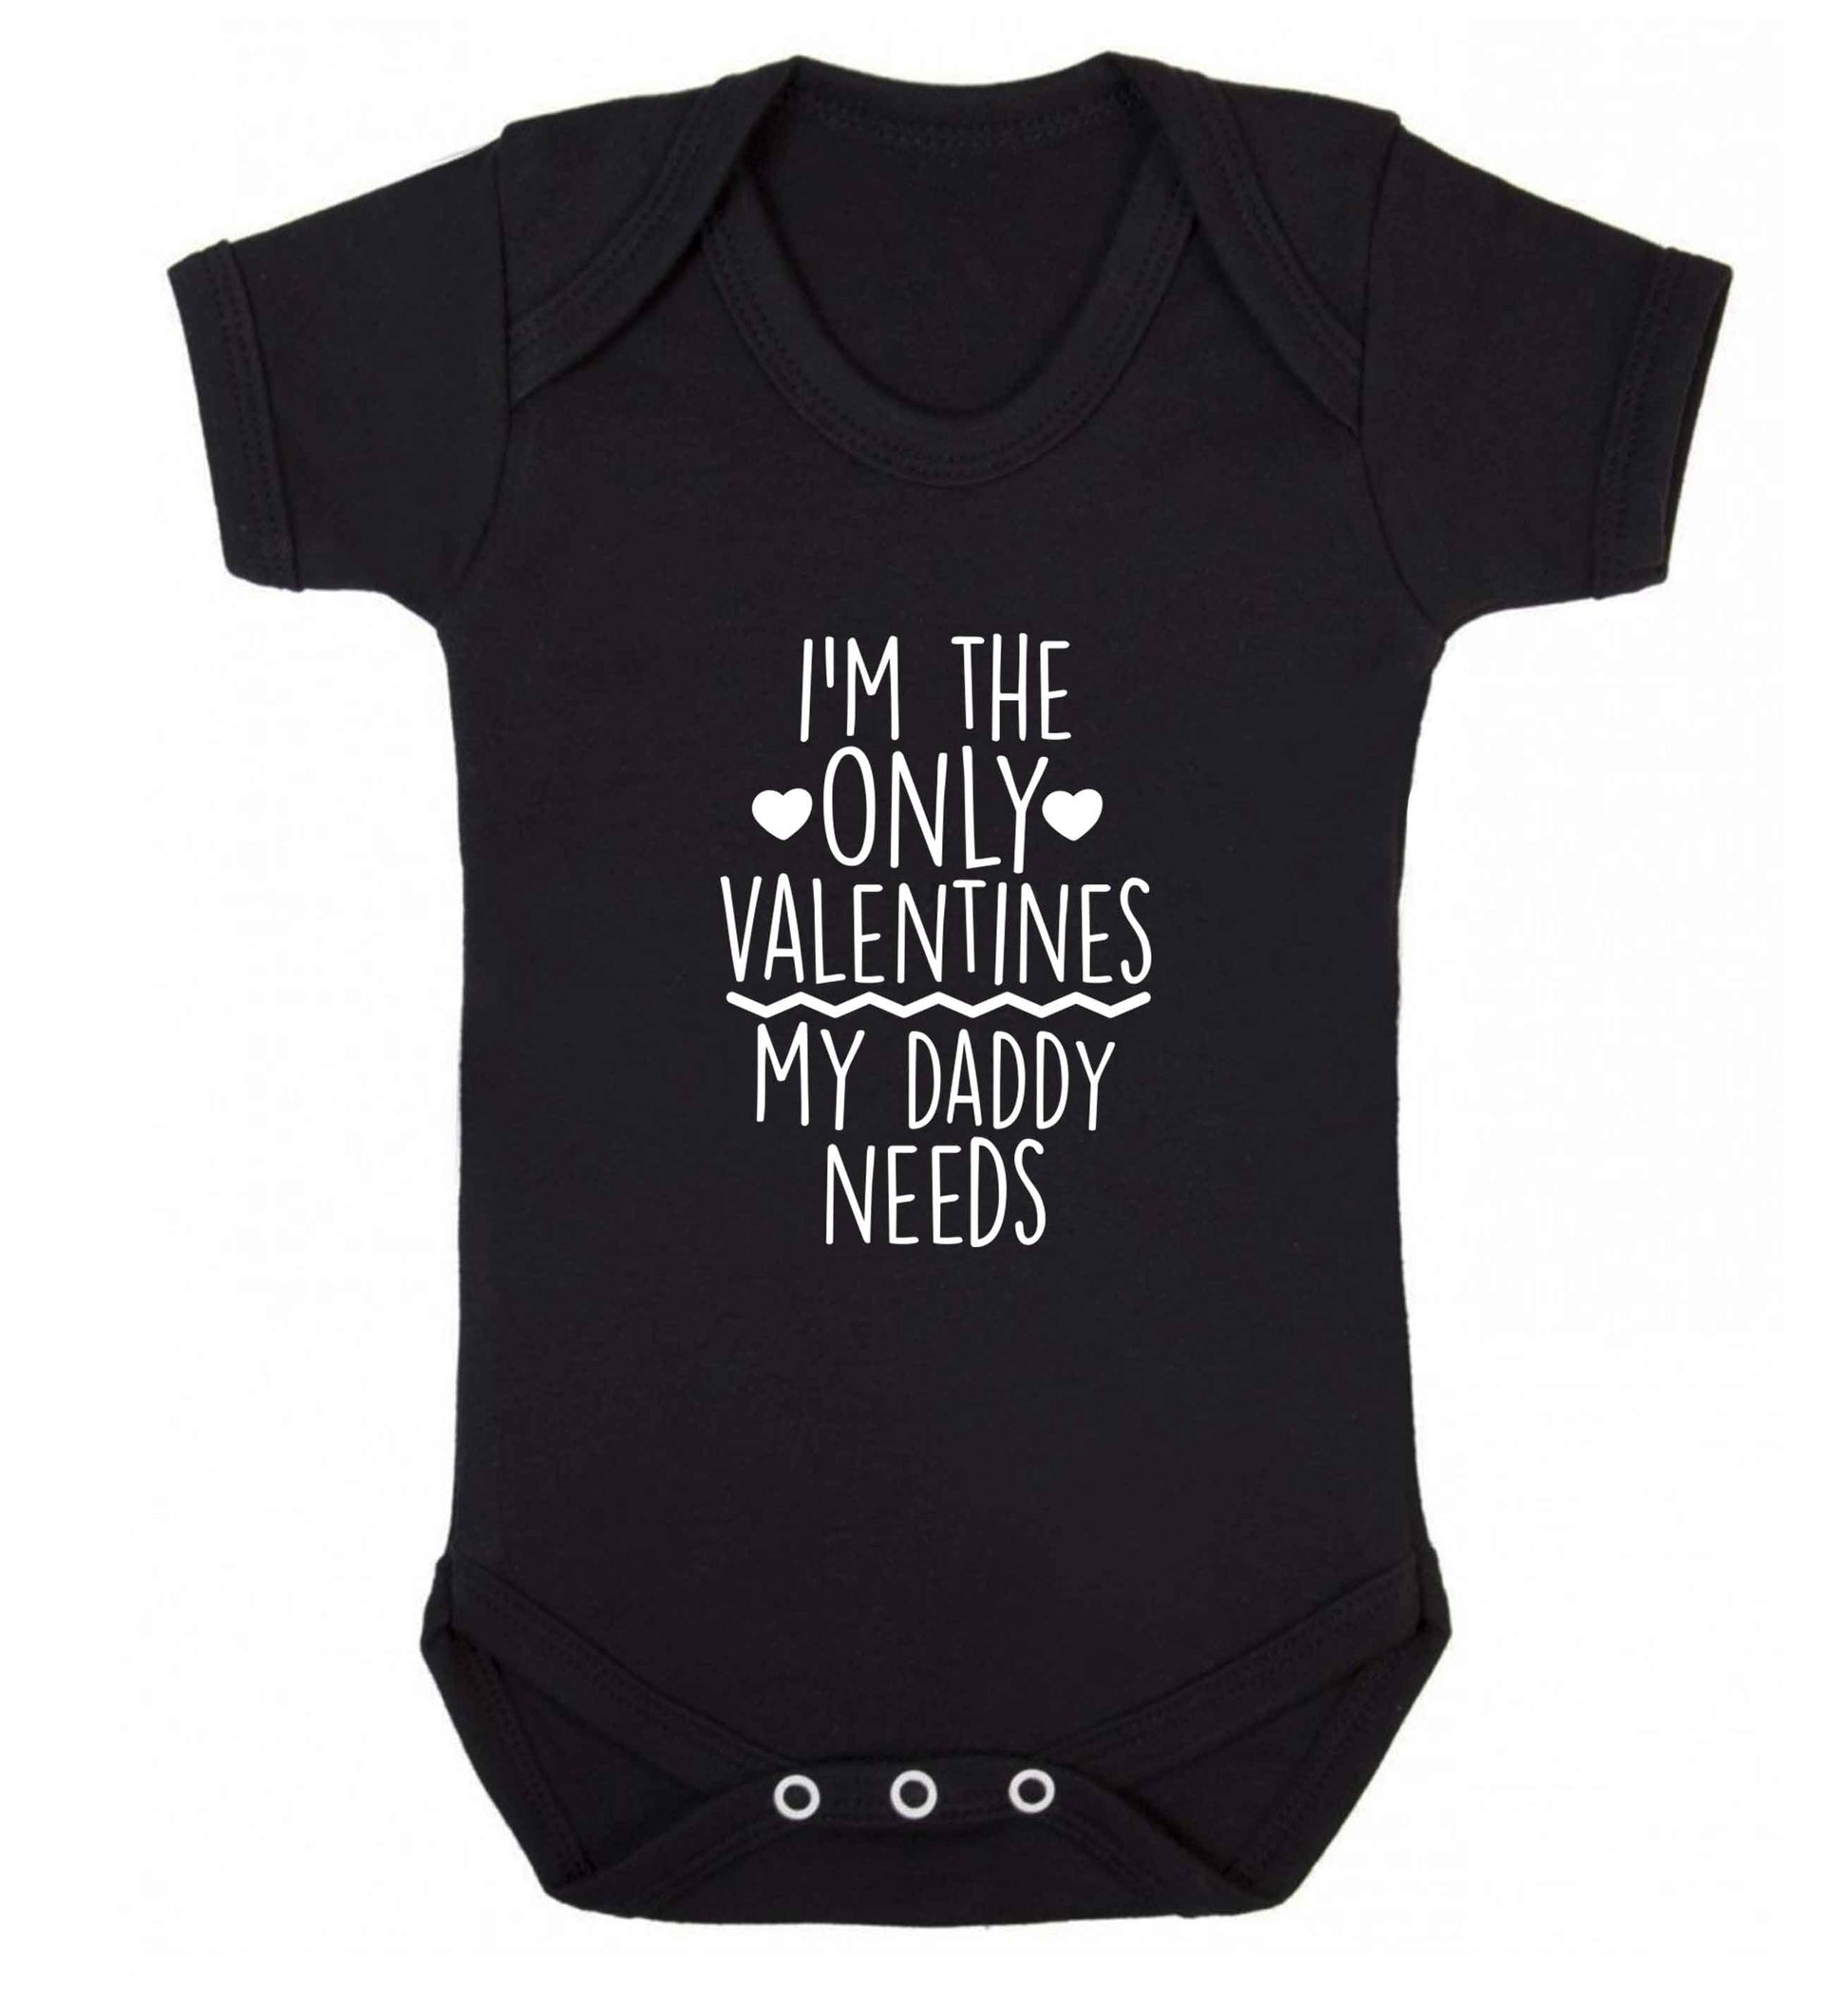 I'm the only valentines my daddy needs baby vest black 18-24 months